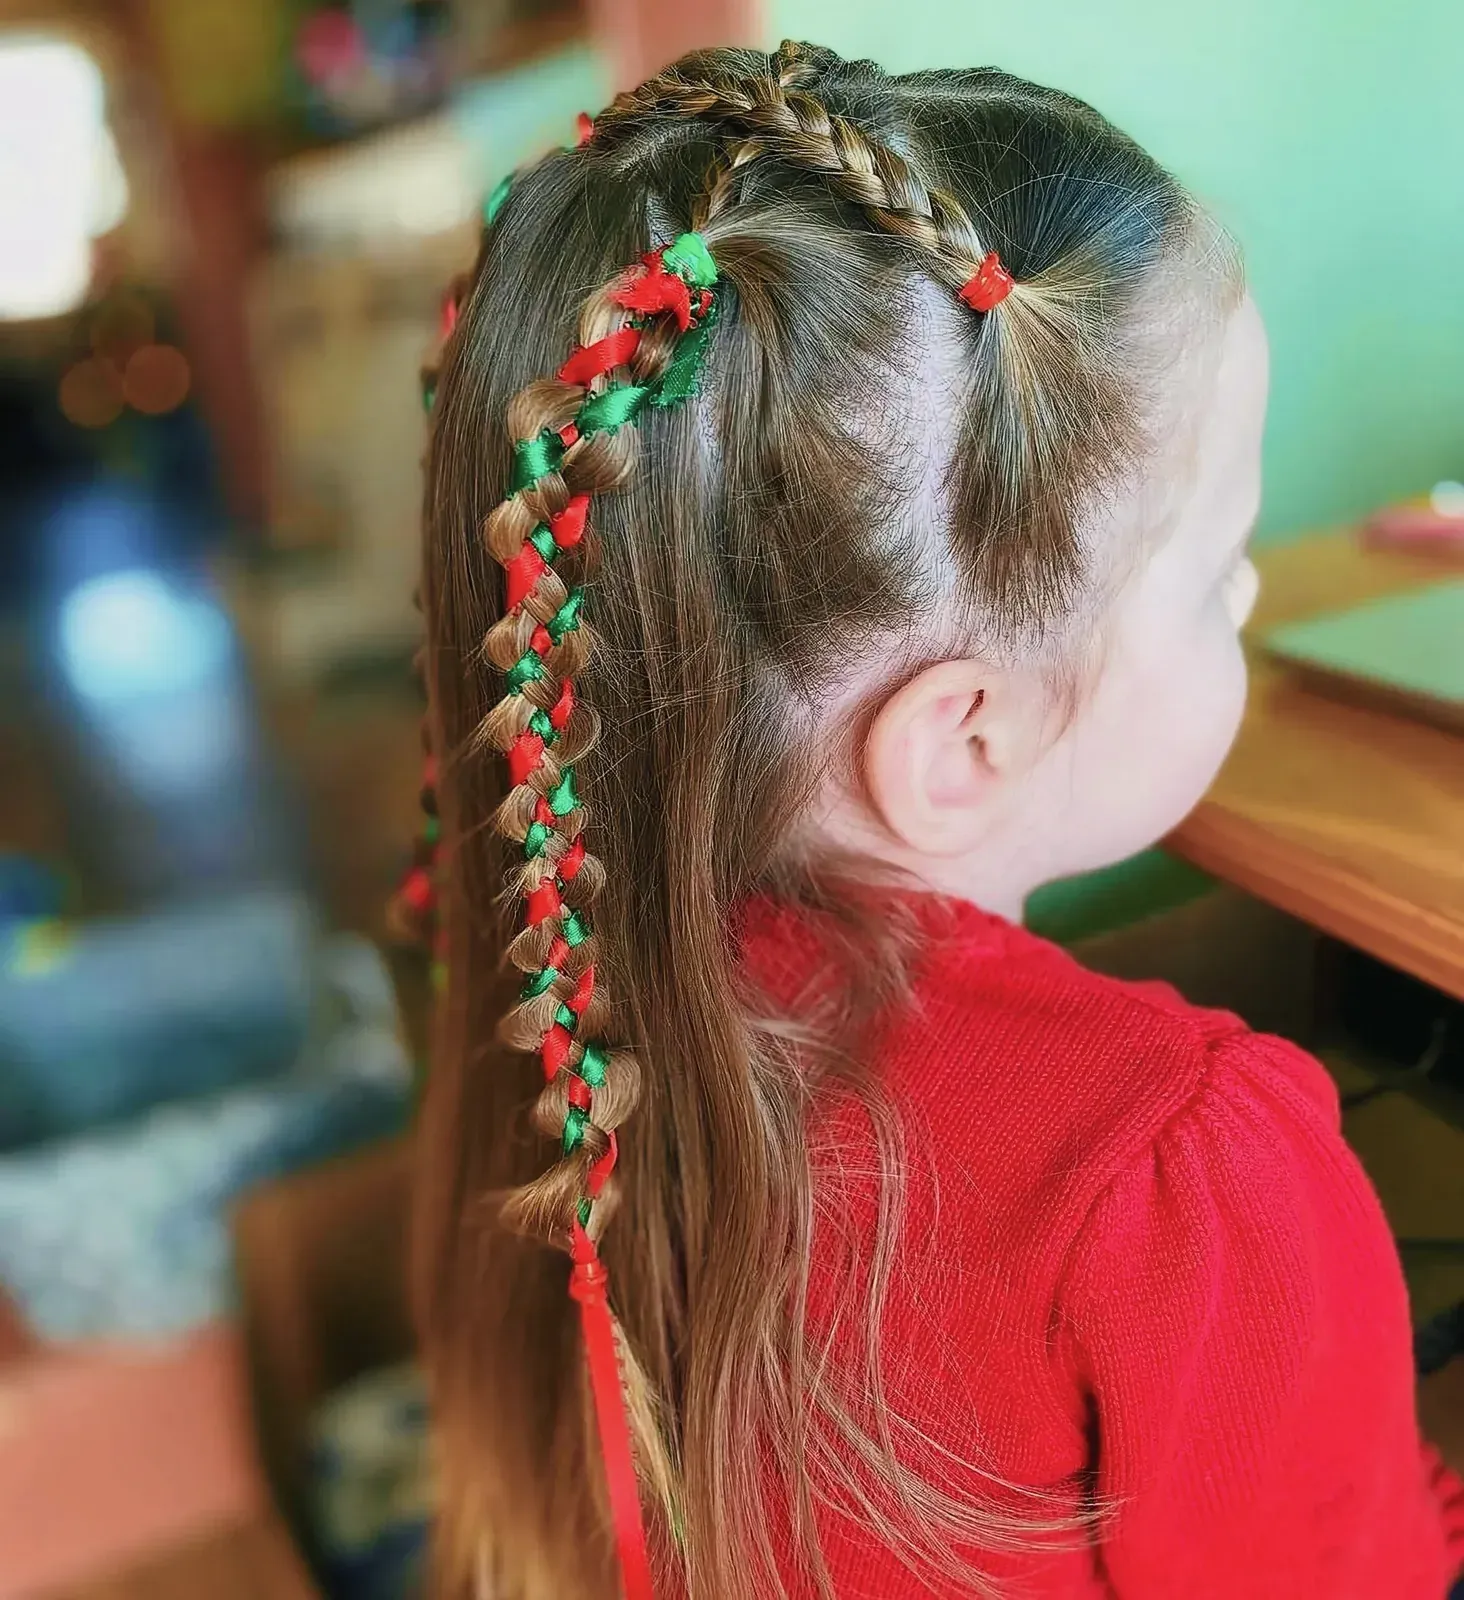 Young girl with elegant braided hairstyle and ribbons